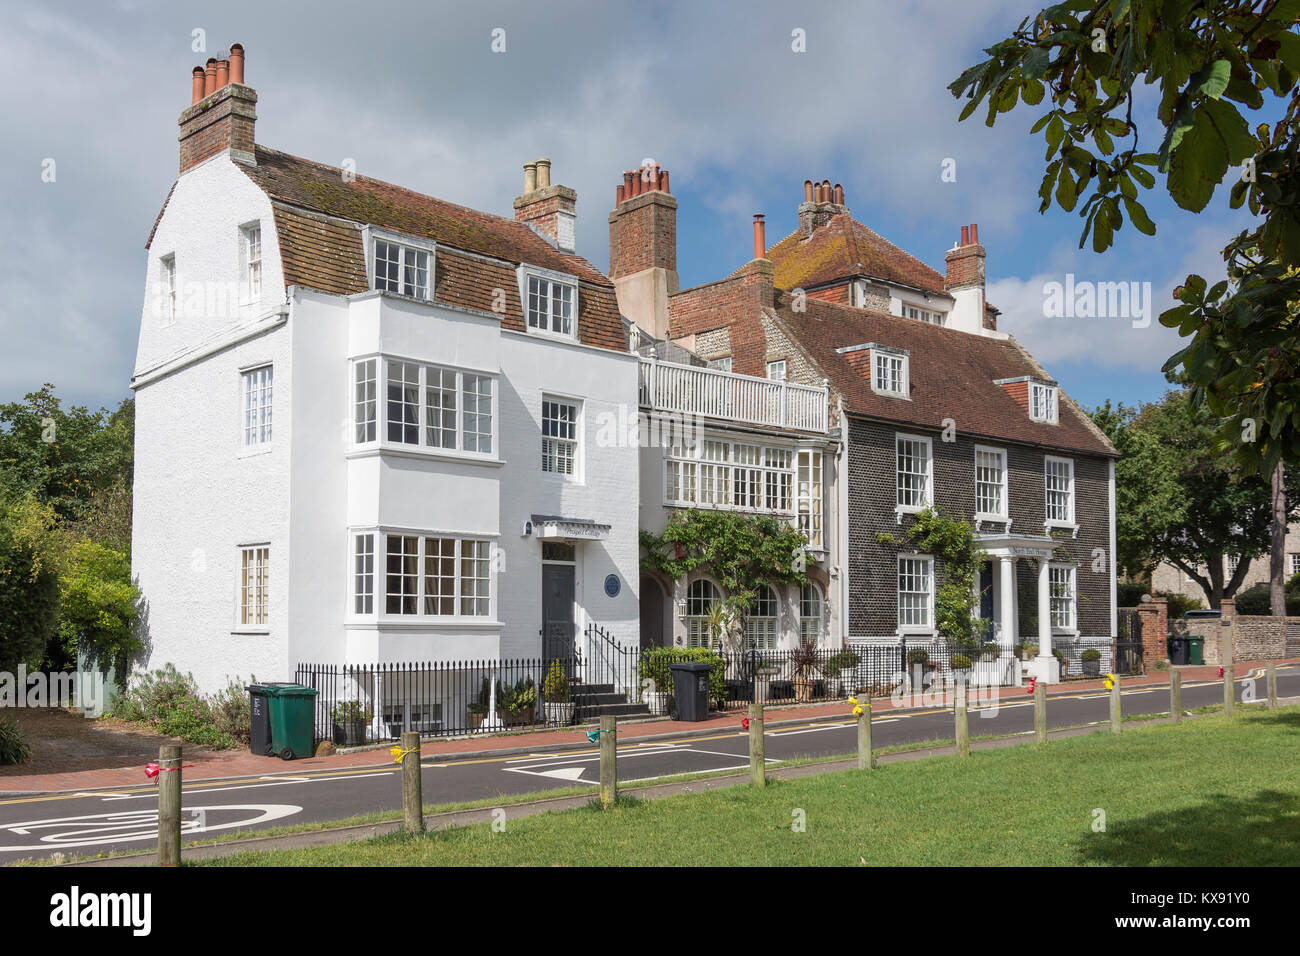 Period houses on The Green, Rottingdean, East Sussex, England, United Kingdom Stock Photo